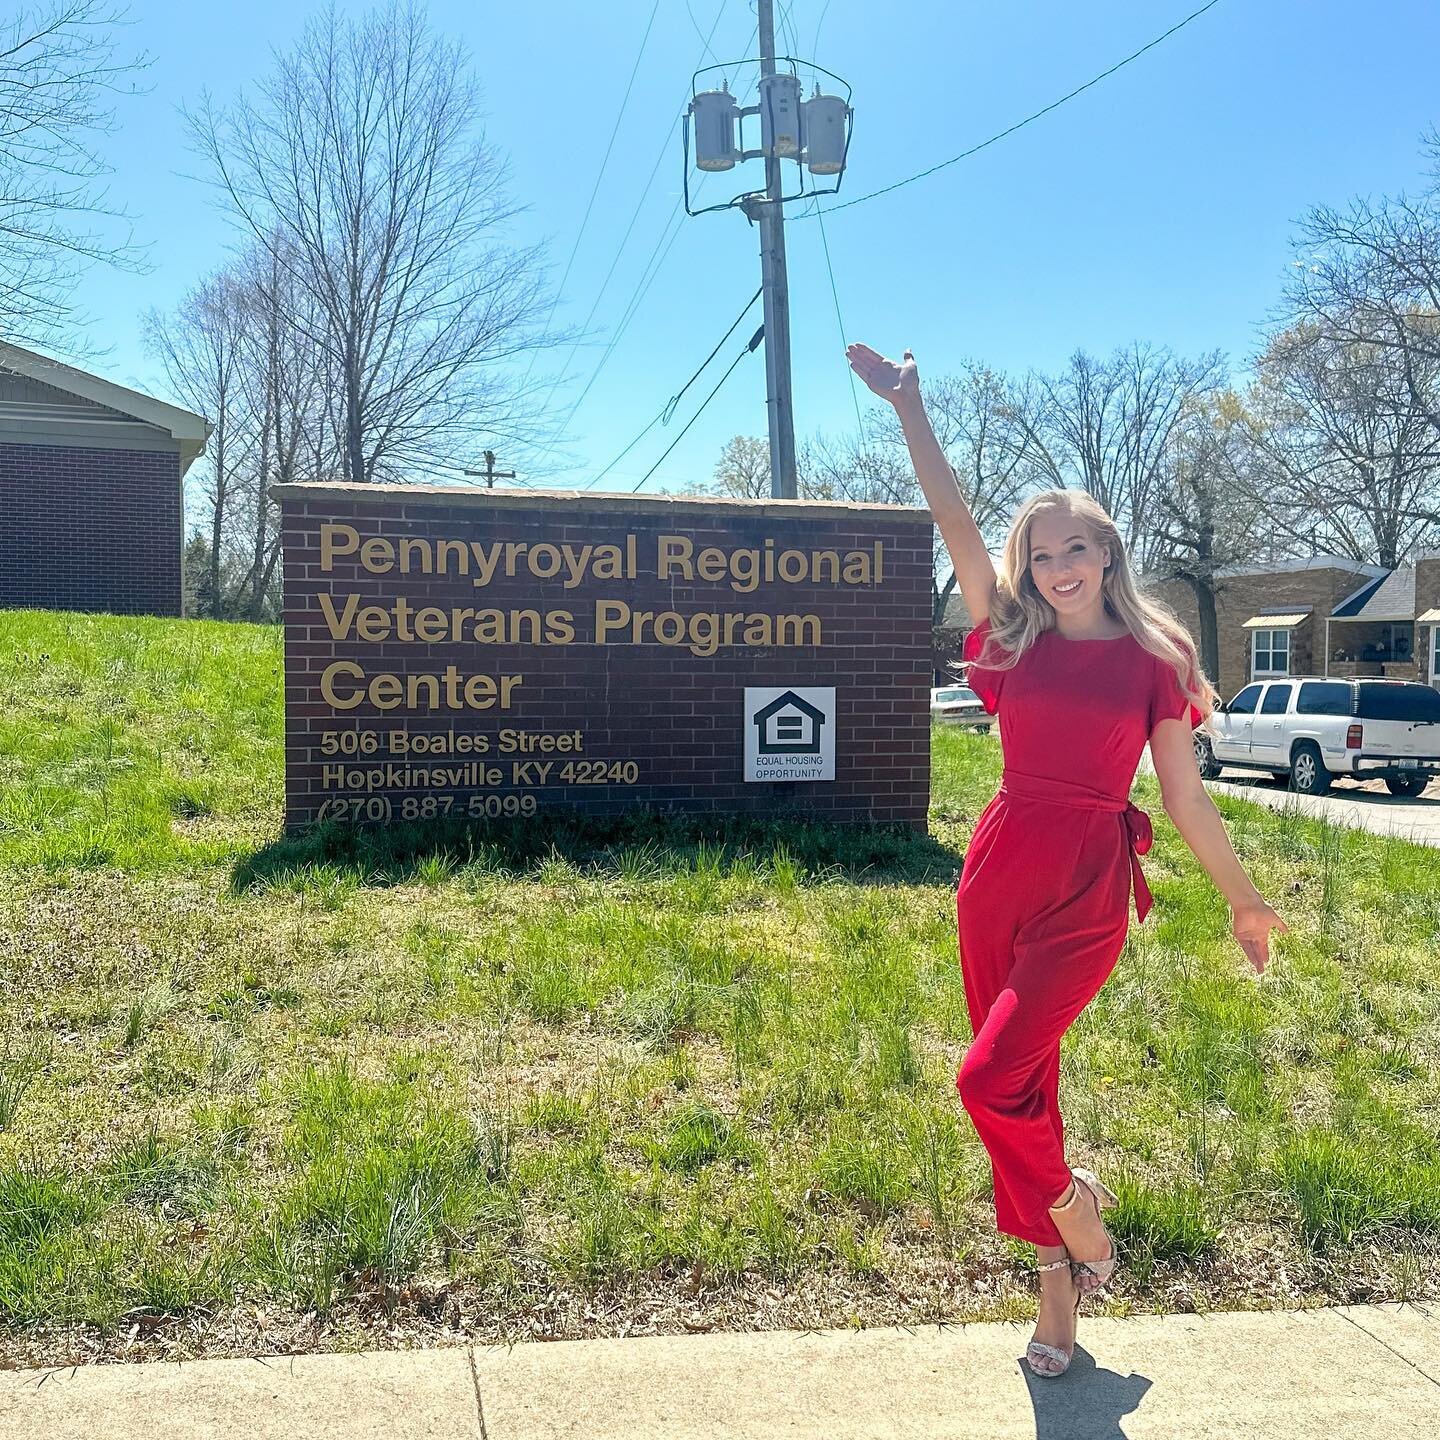 The first stop on our #HeroesHomeTour was the Pennyroyal Veterans Center in Hopkinsville, Kentucky which is just north of Fort Campbell! Meeting these incredible individuals was such an honor. They were so kind and genuine to talk with. Hearing their